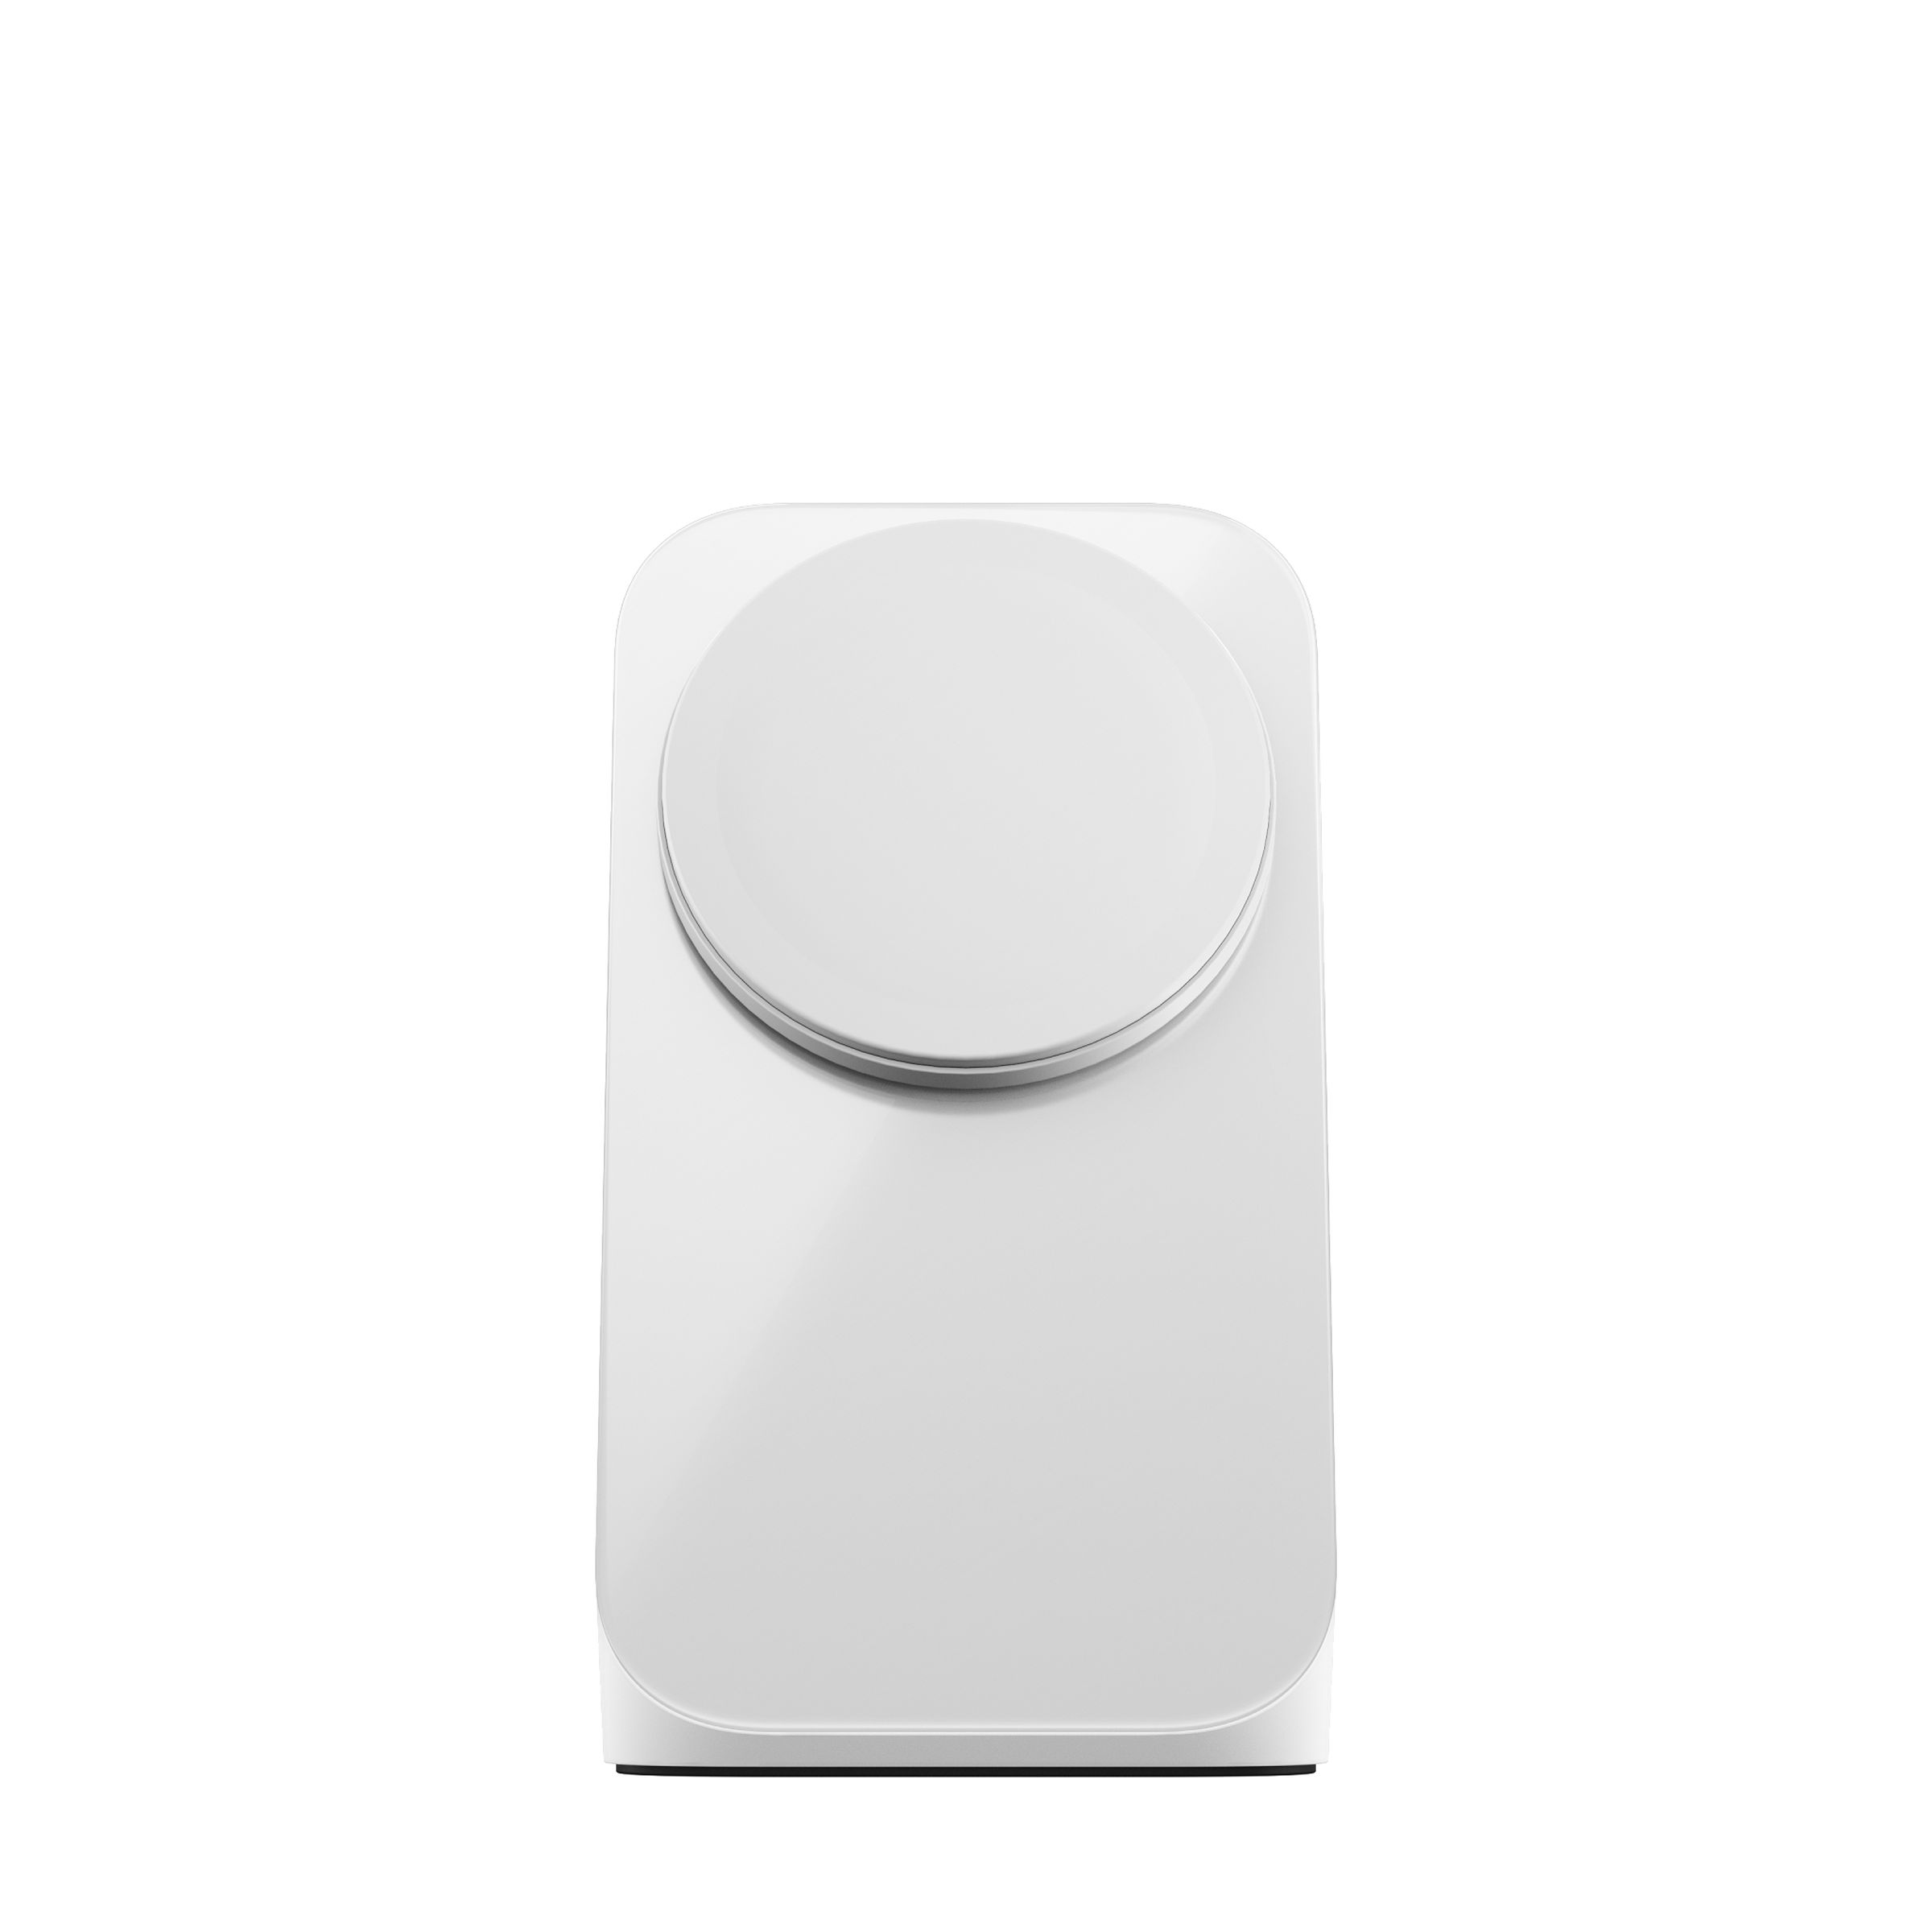 The Nomad Stand Qi2 Magnetic Wireless Charger in white against a blank backdrop.